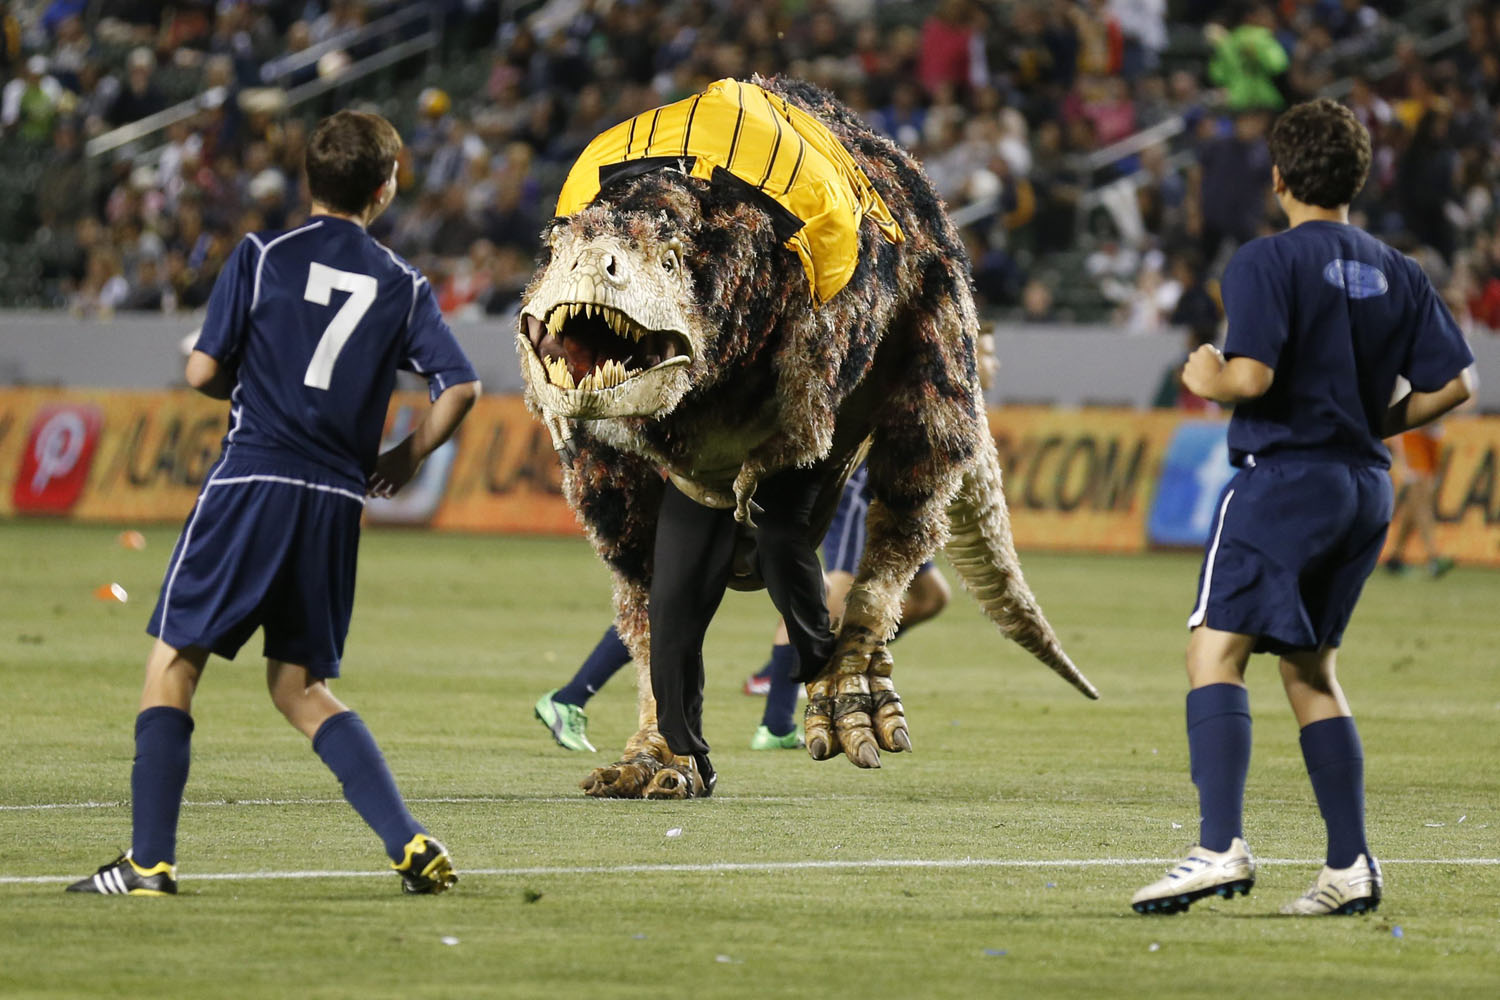 A Tyrannosaurus Rex dinosaur costume runs on the field as young boys play an exhibition soccer match during halftime of the MLS soccer game between the Los Angeles Galaxy and Seattle Sounders FC in Carson